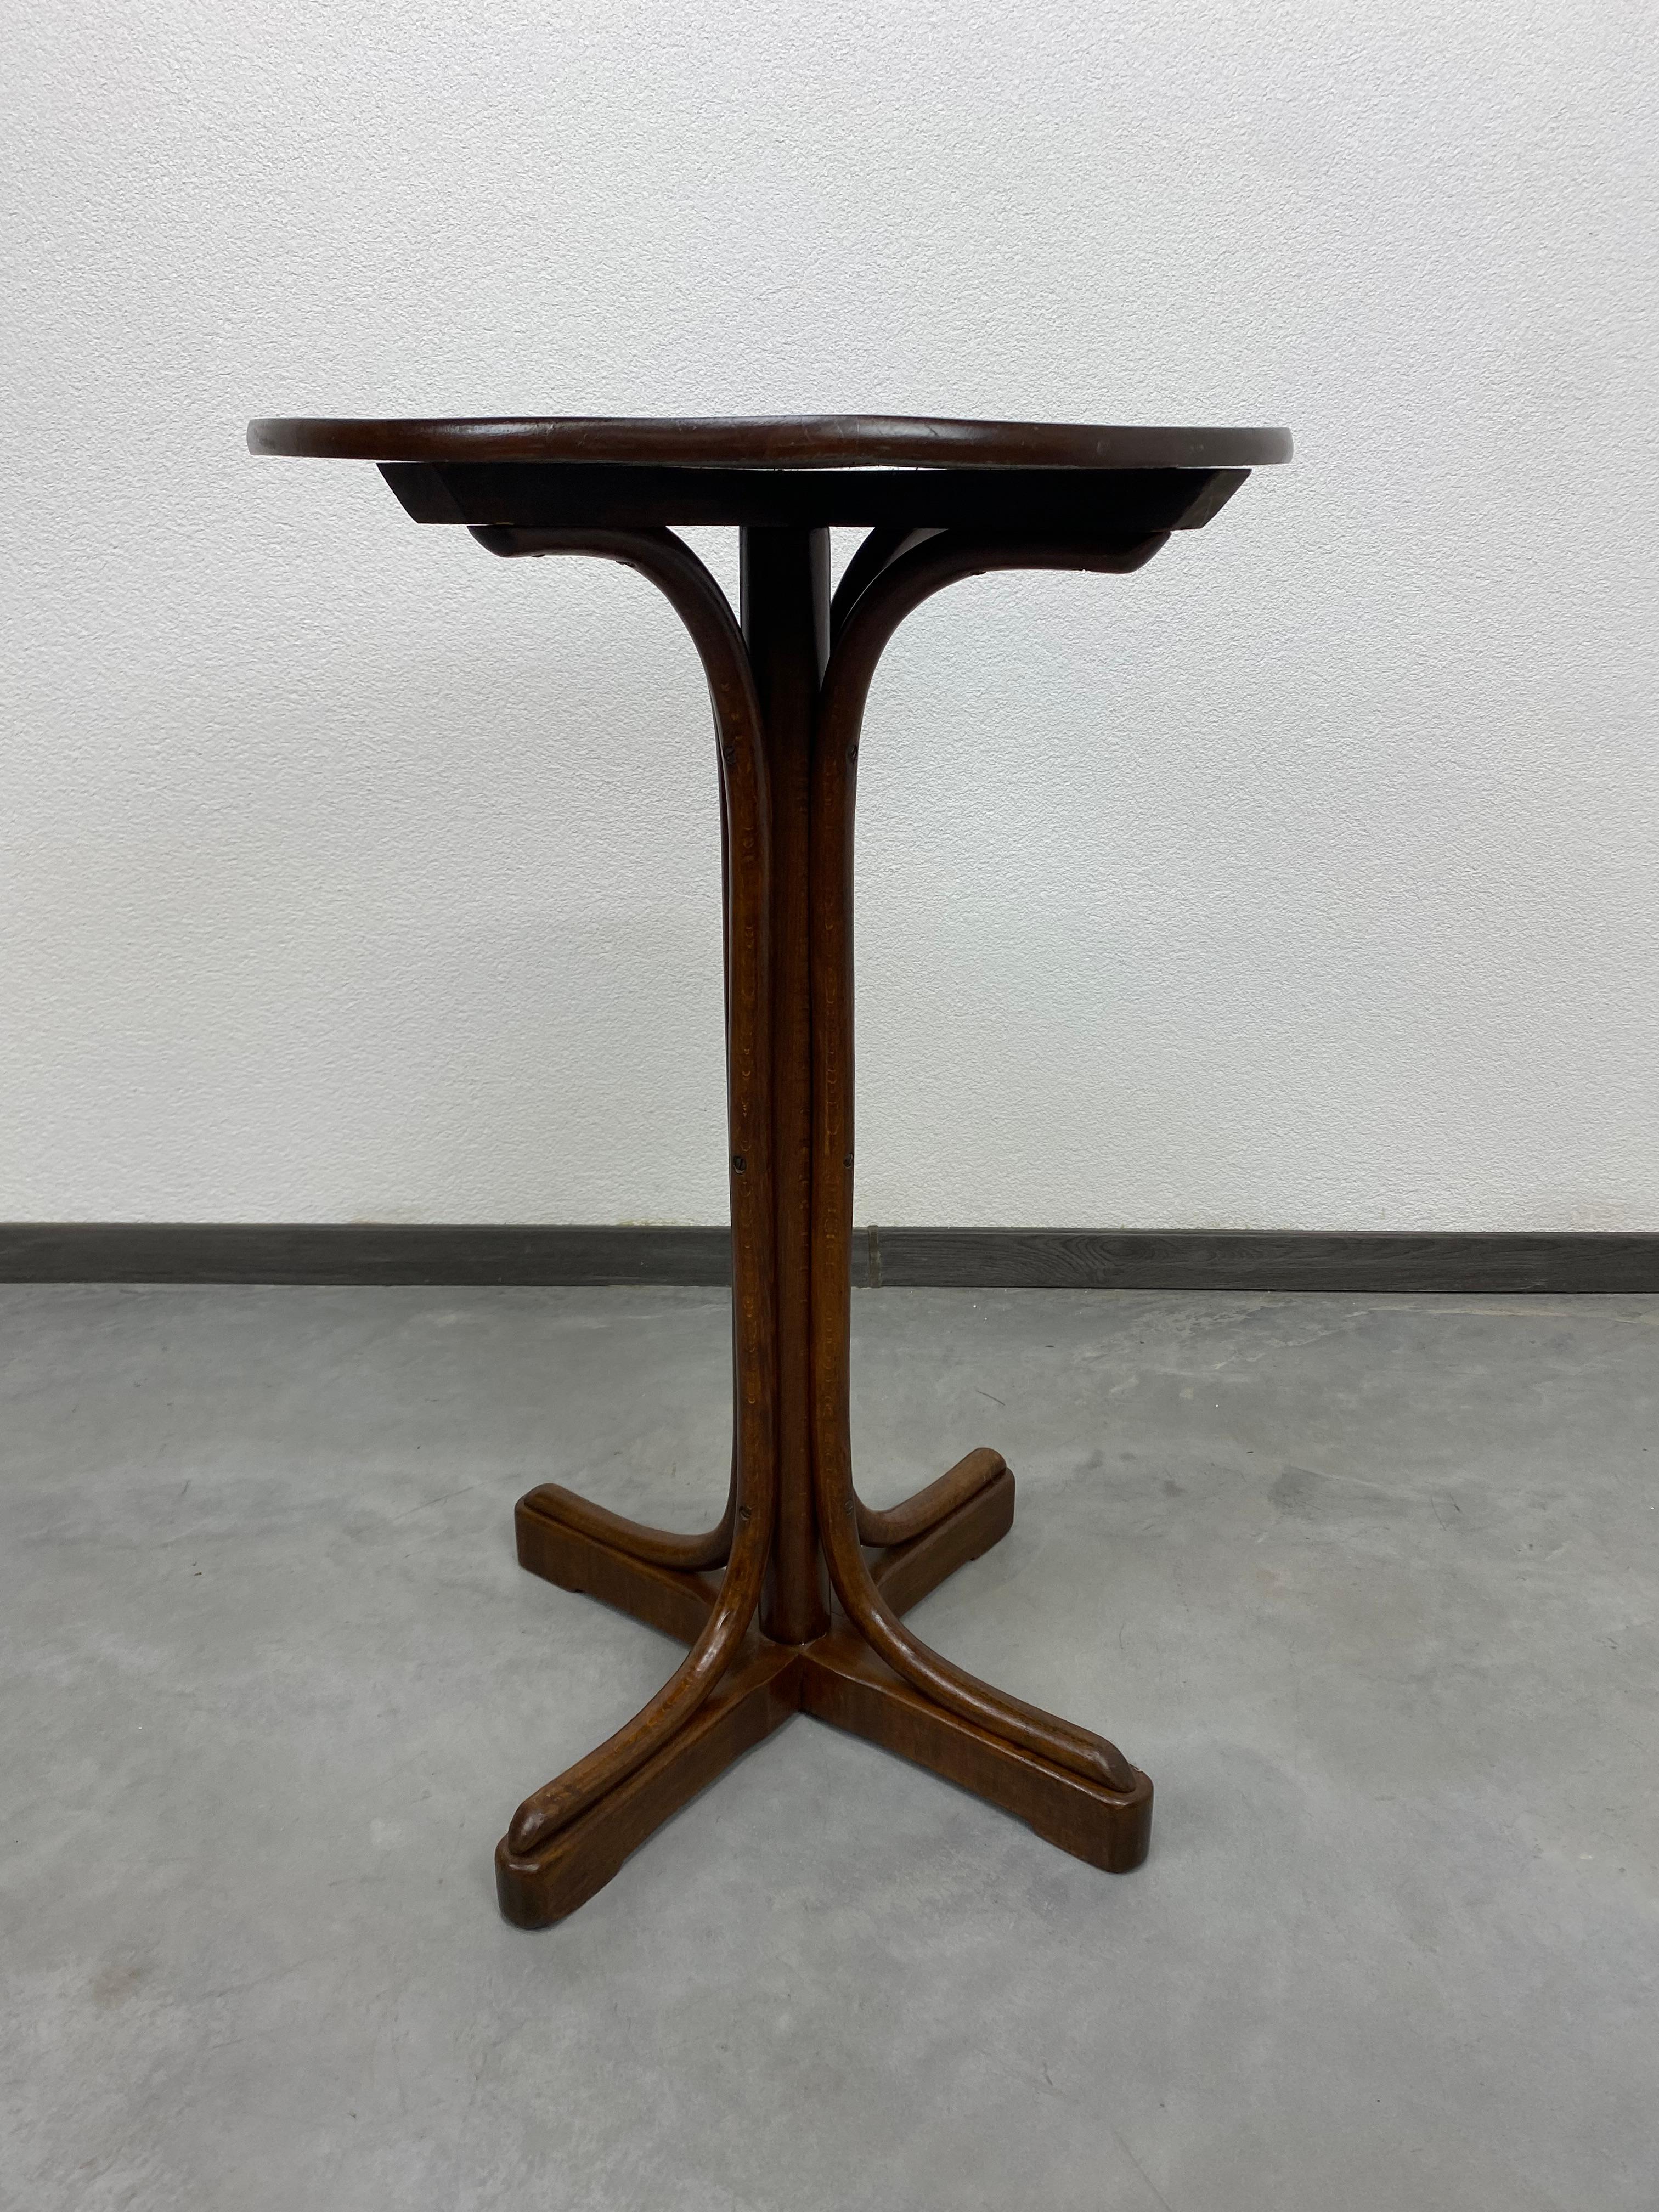 Bentwood coffee table by Thonet in original vintage condition, wears slight scratches on the top.